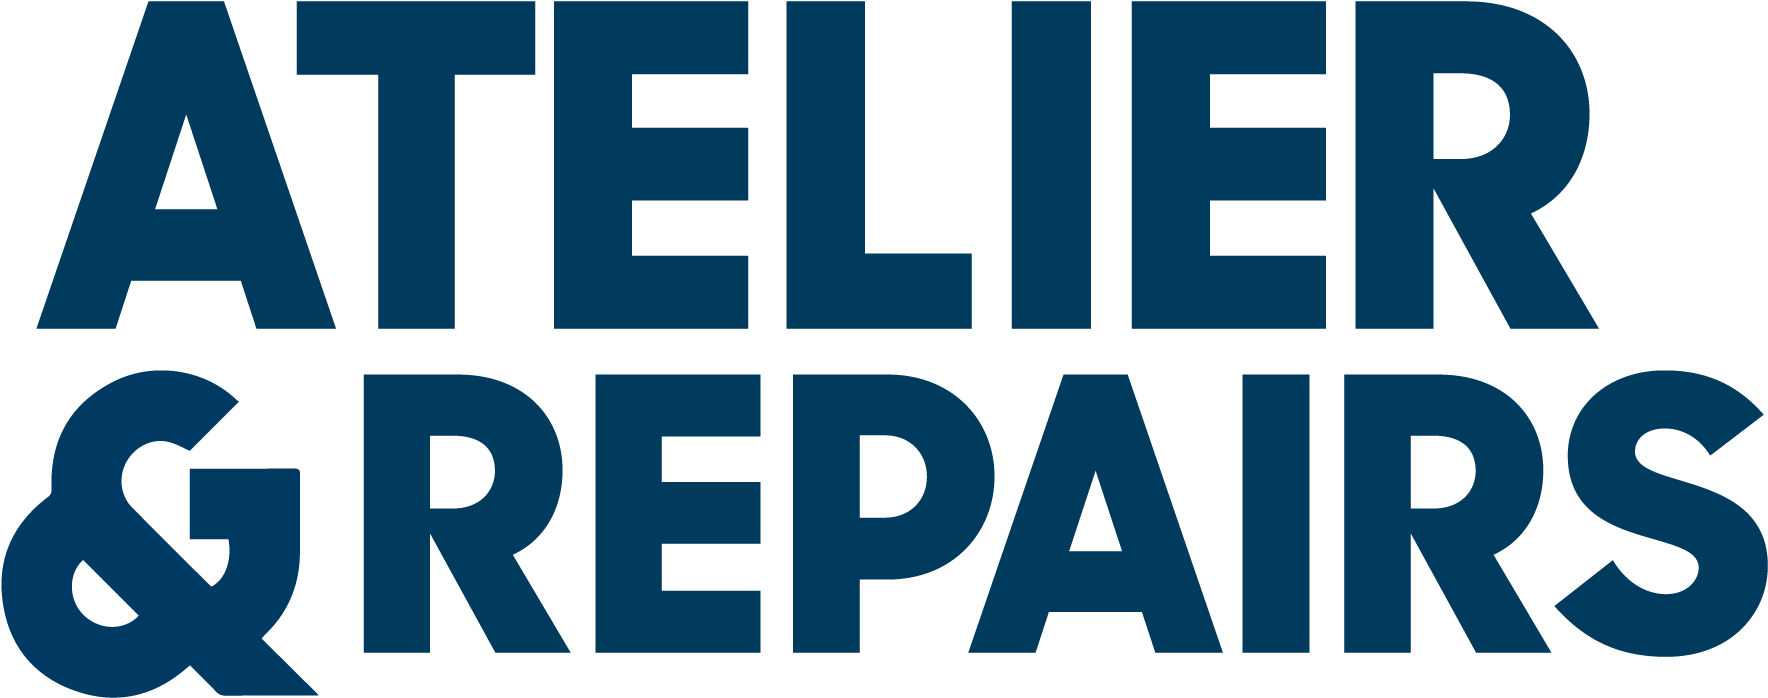 Atelier & Repairs Logo - Baker Hughes A Ge Company (1814x715), Png Download